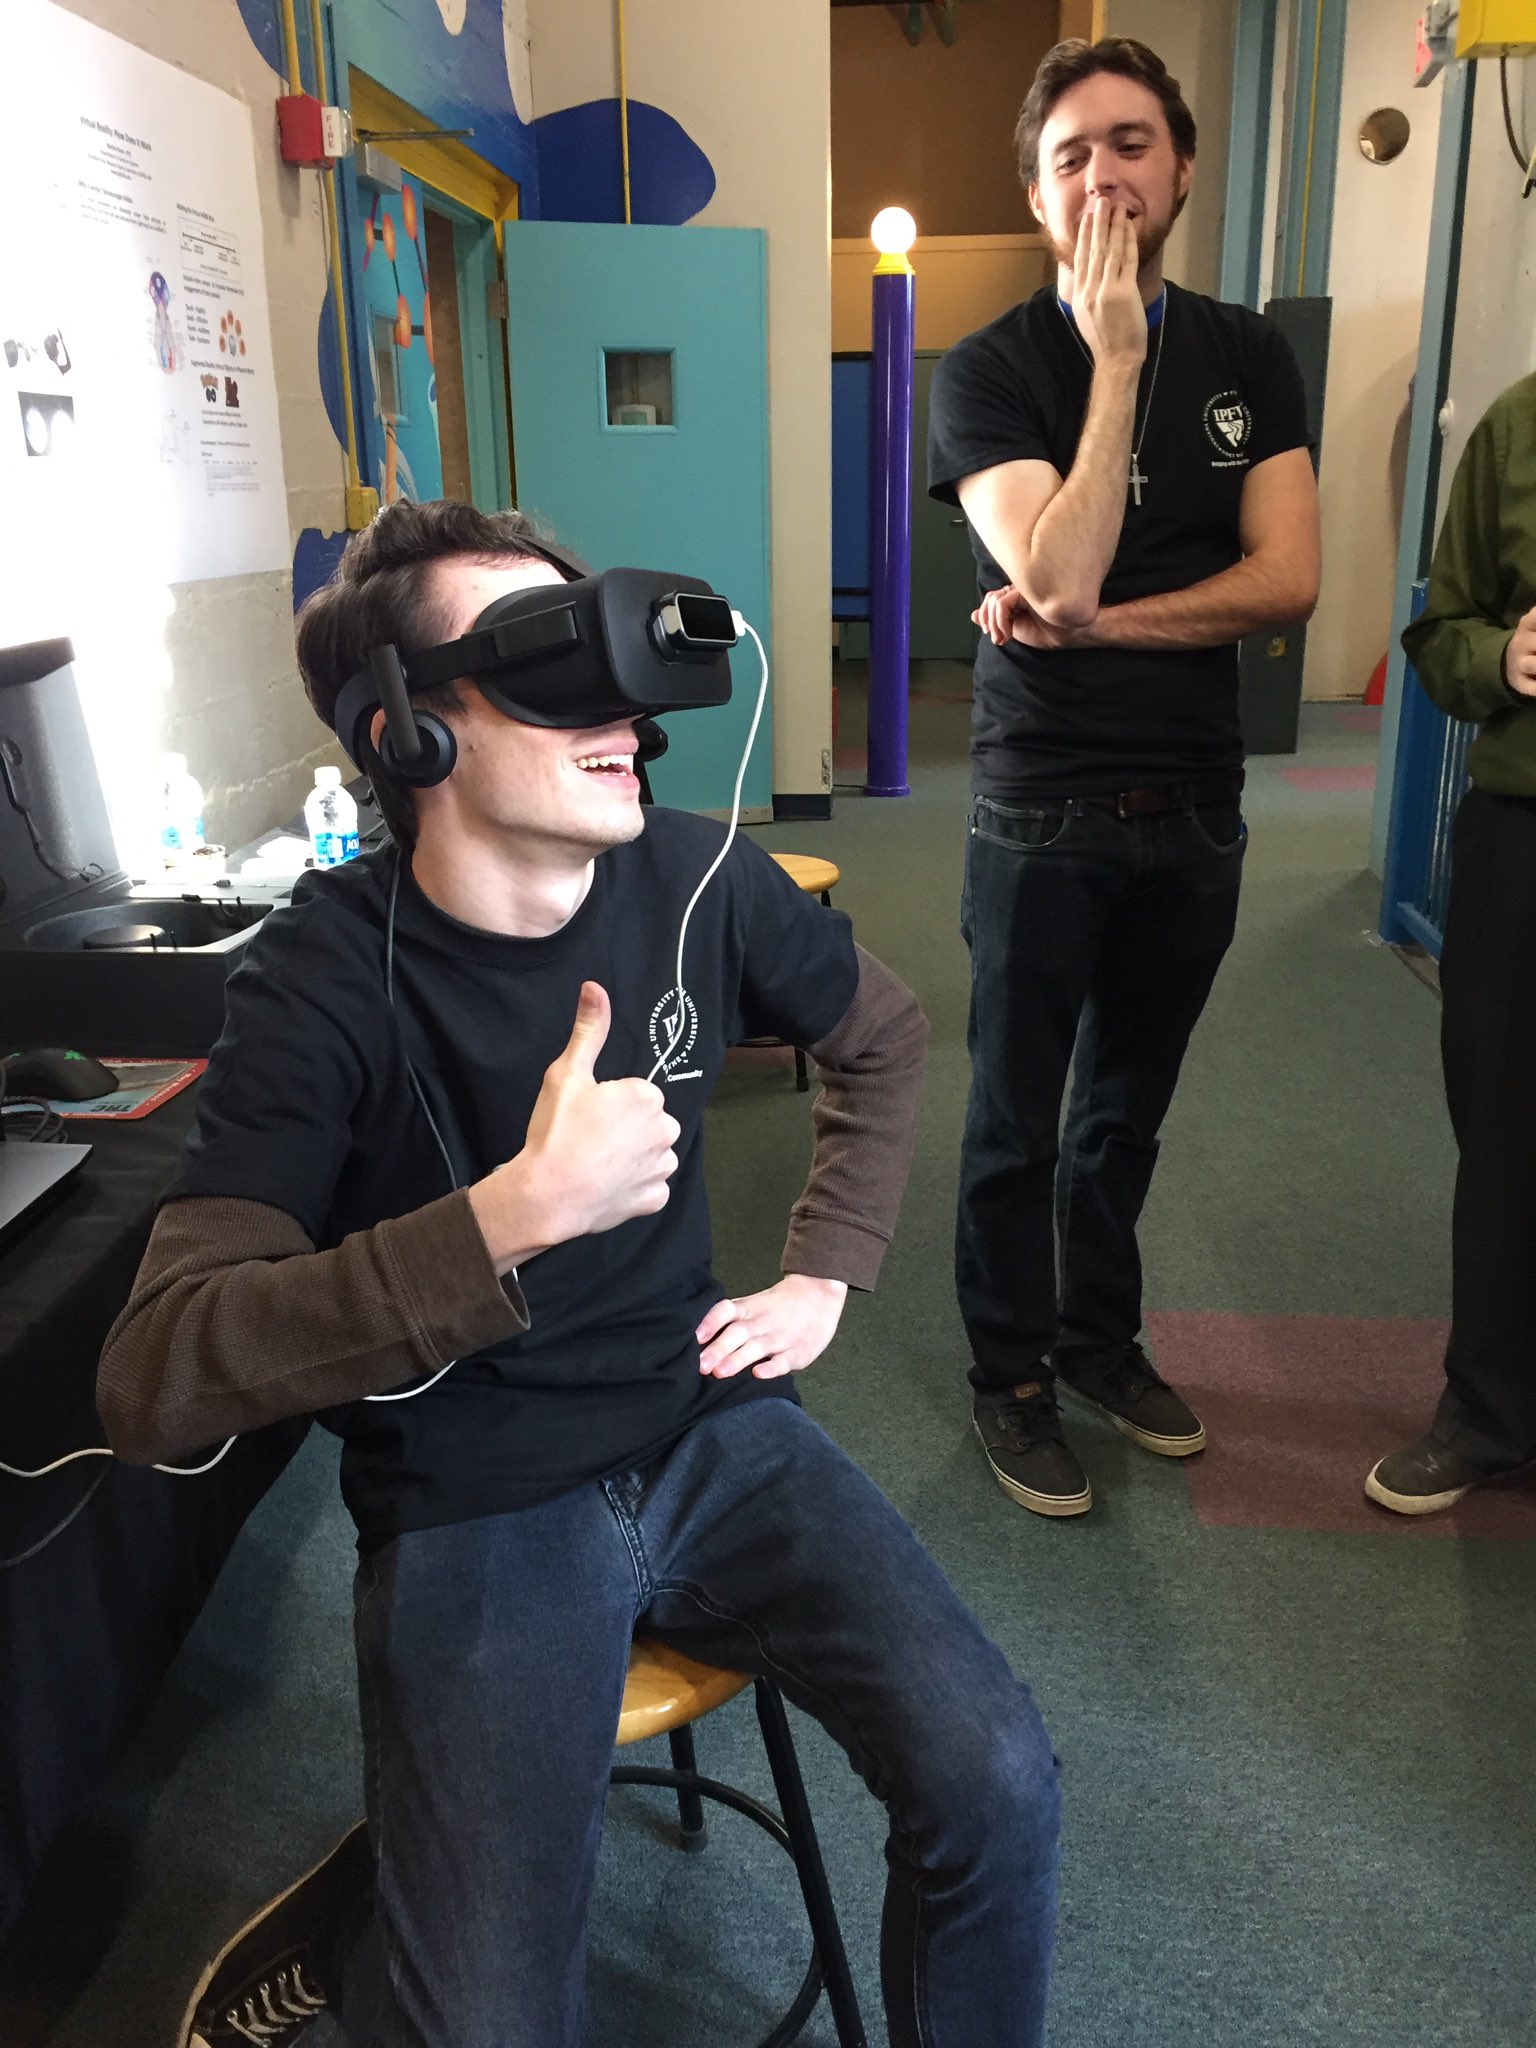 Male student excitedly engaging with VR